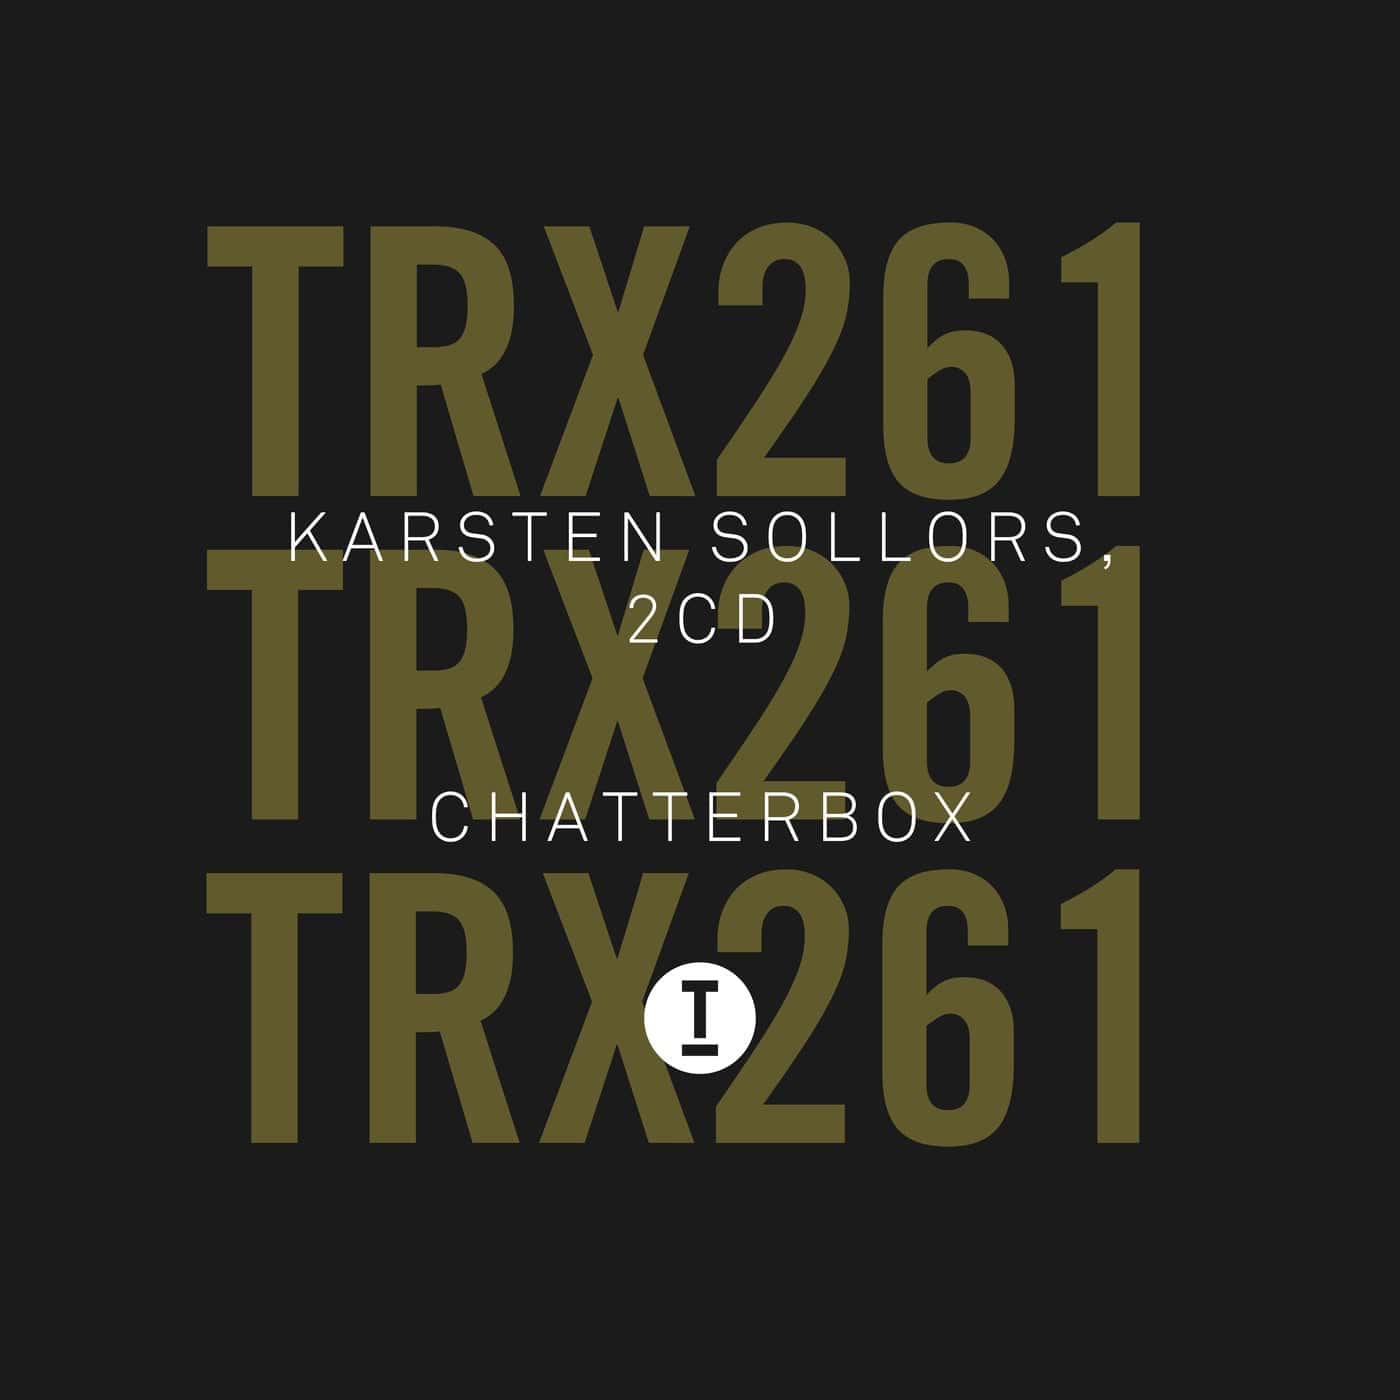 Download Karsten Sollors, 2CD - Chatterbox on Electrobuzz